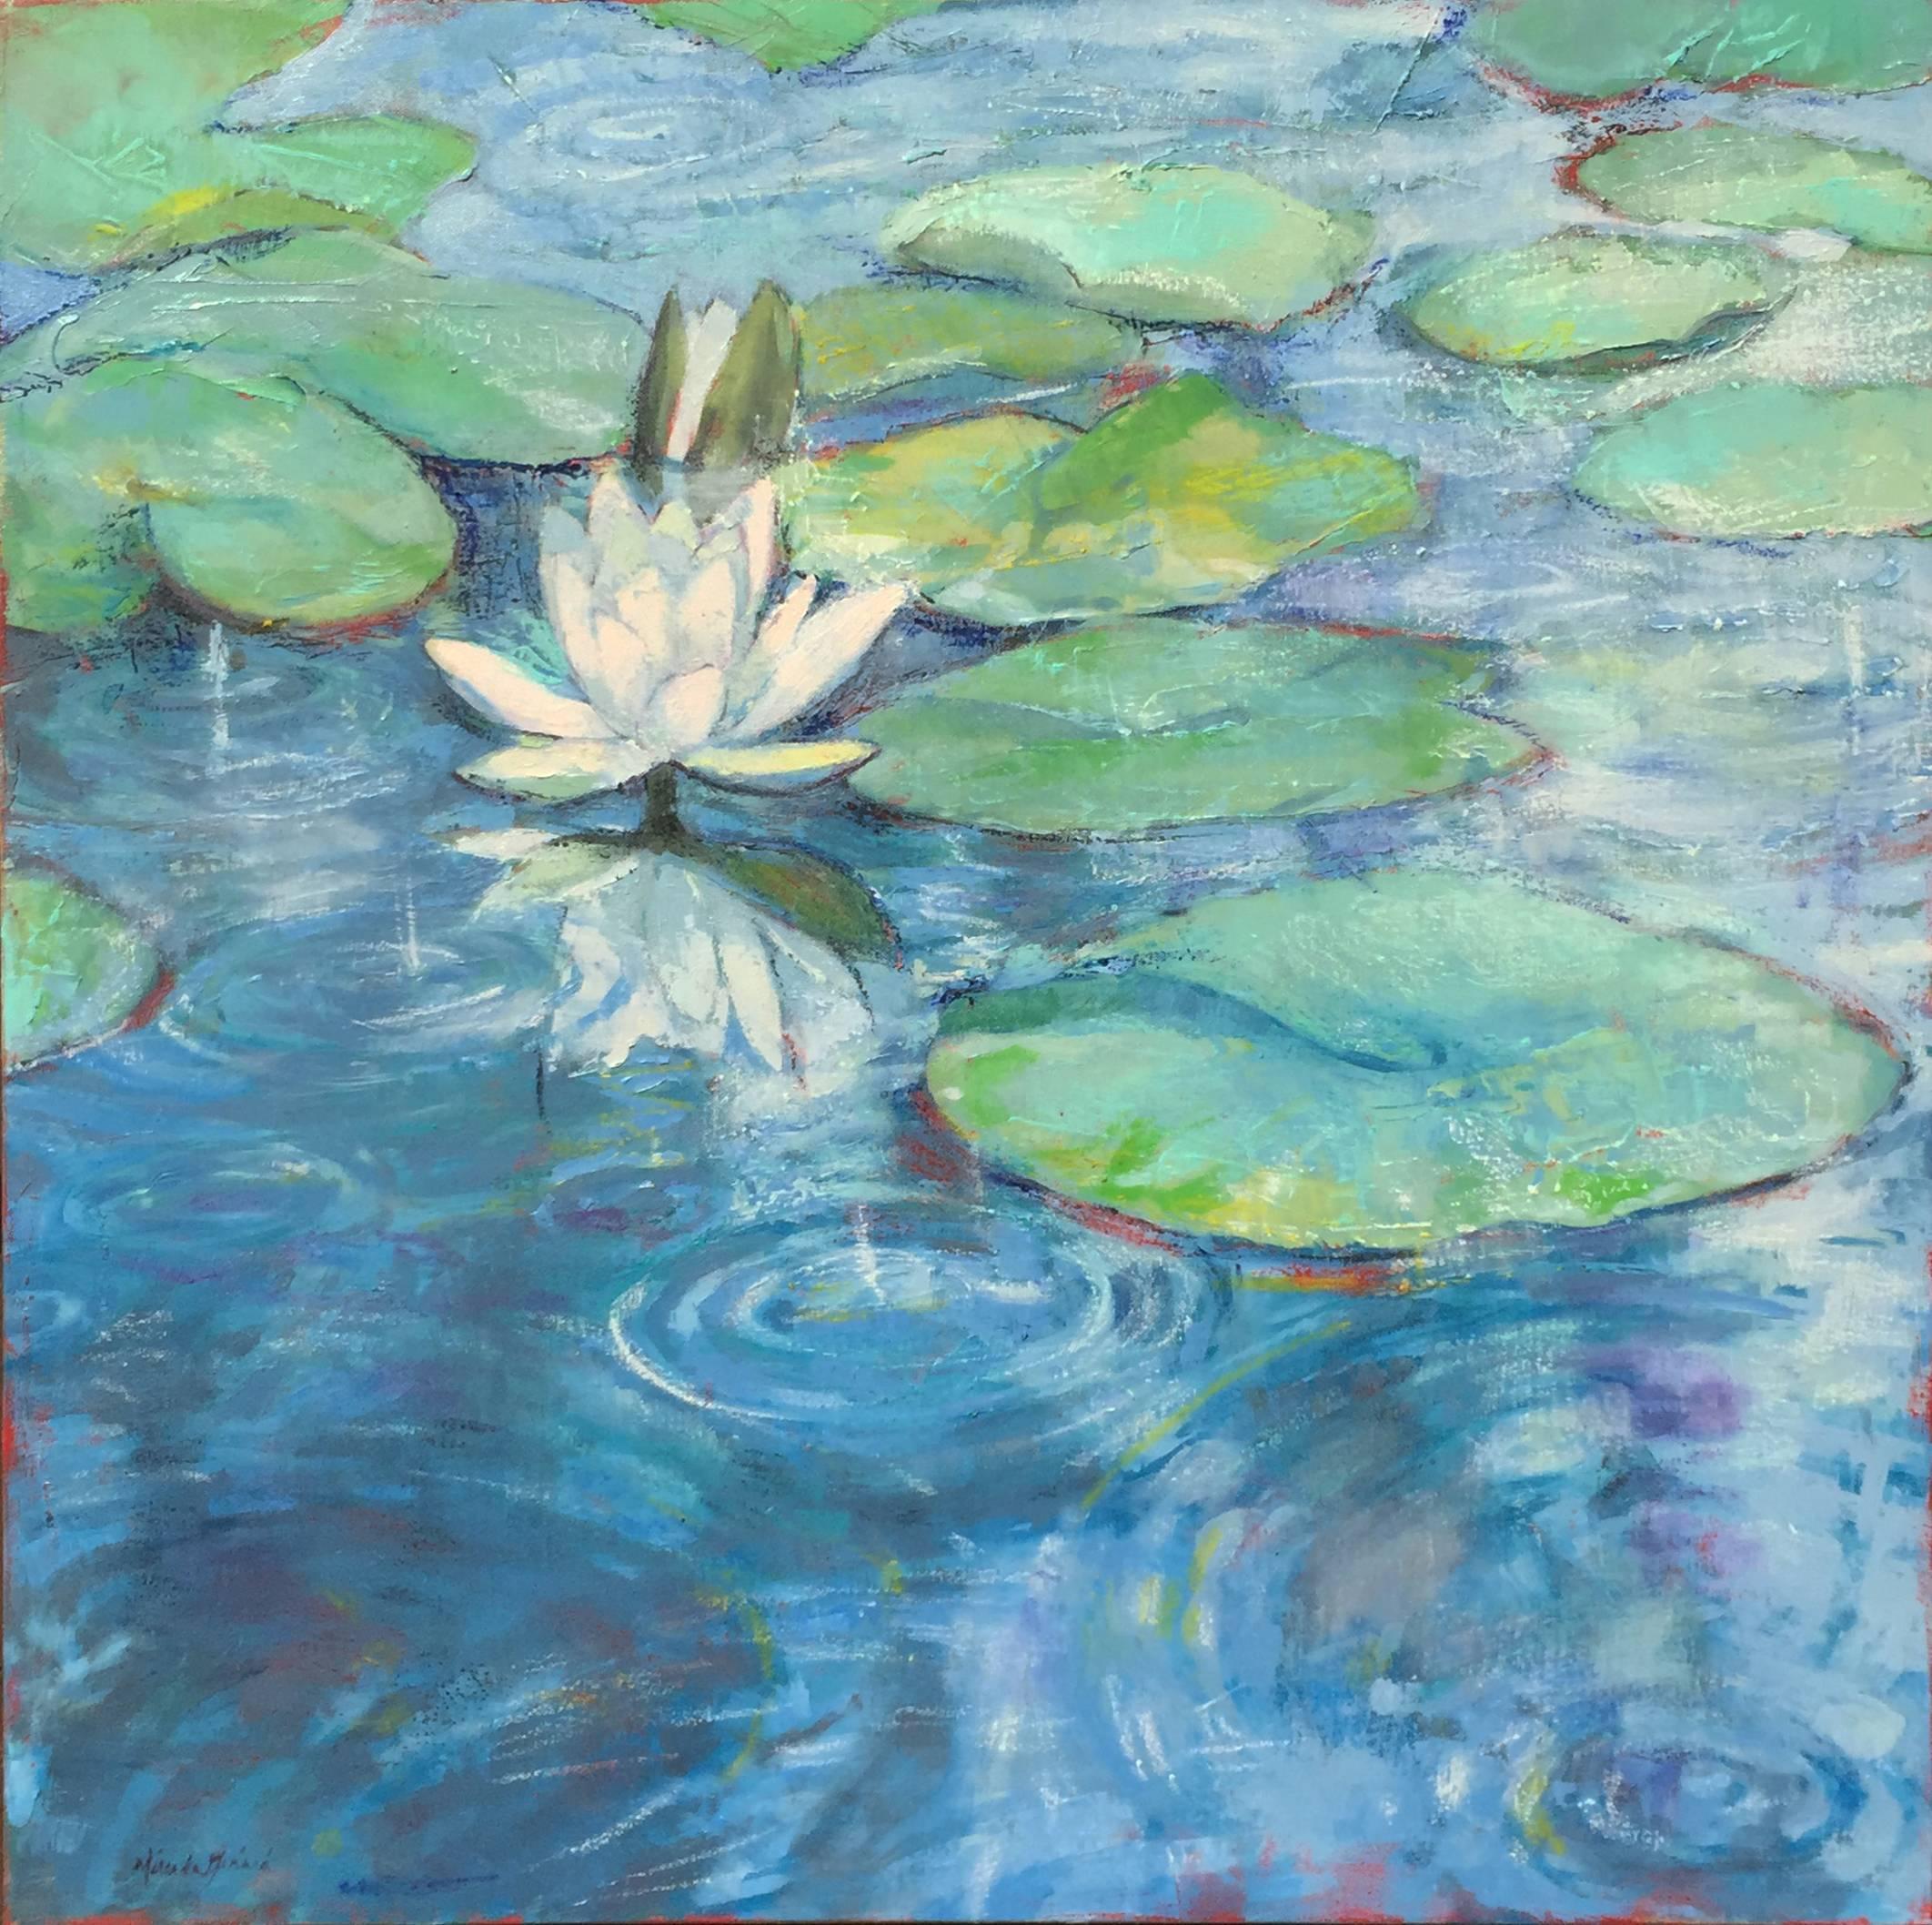 Miranda Girard Landscape Painting - 'Melody', Contemporary Impressionist Monet-Inspired Oil Painting